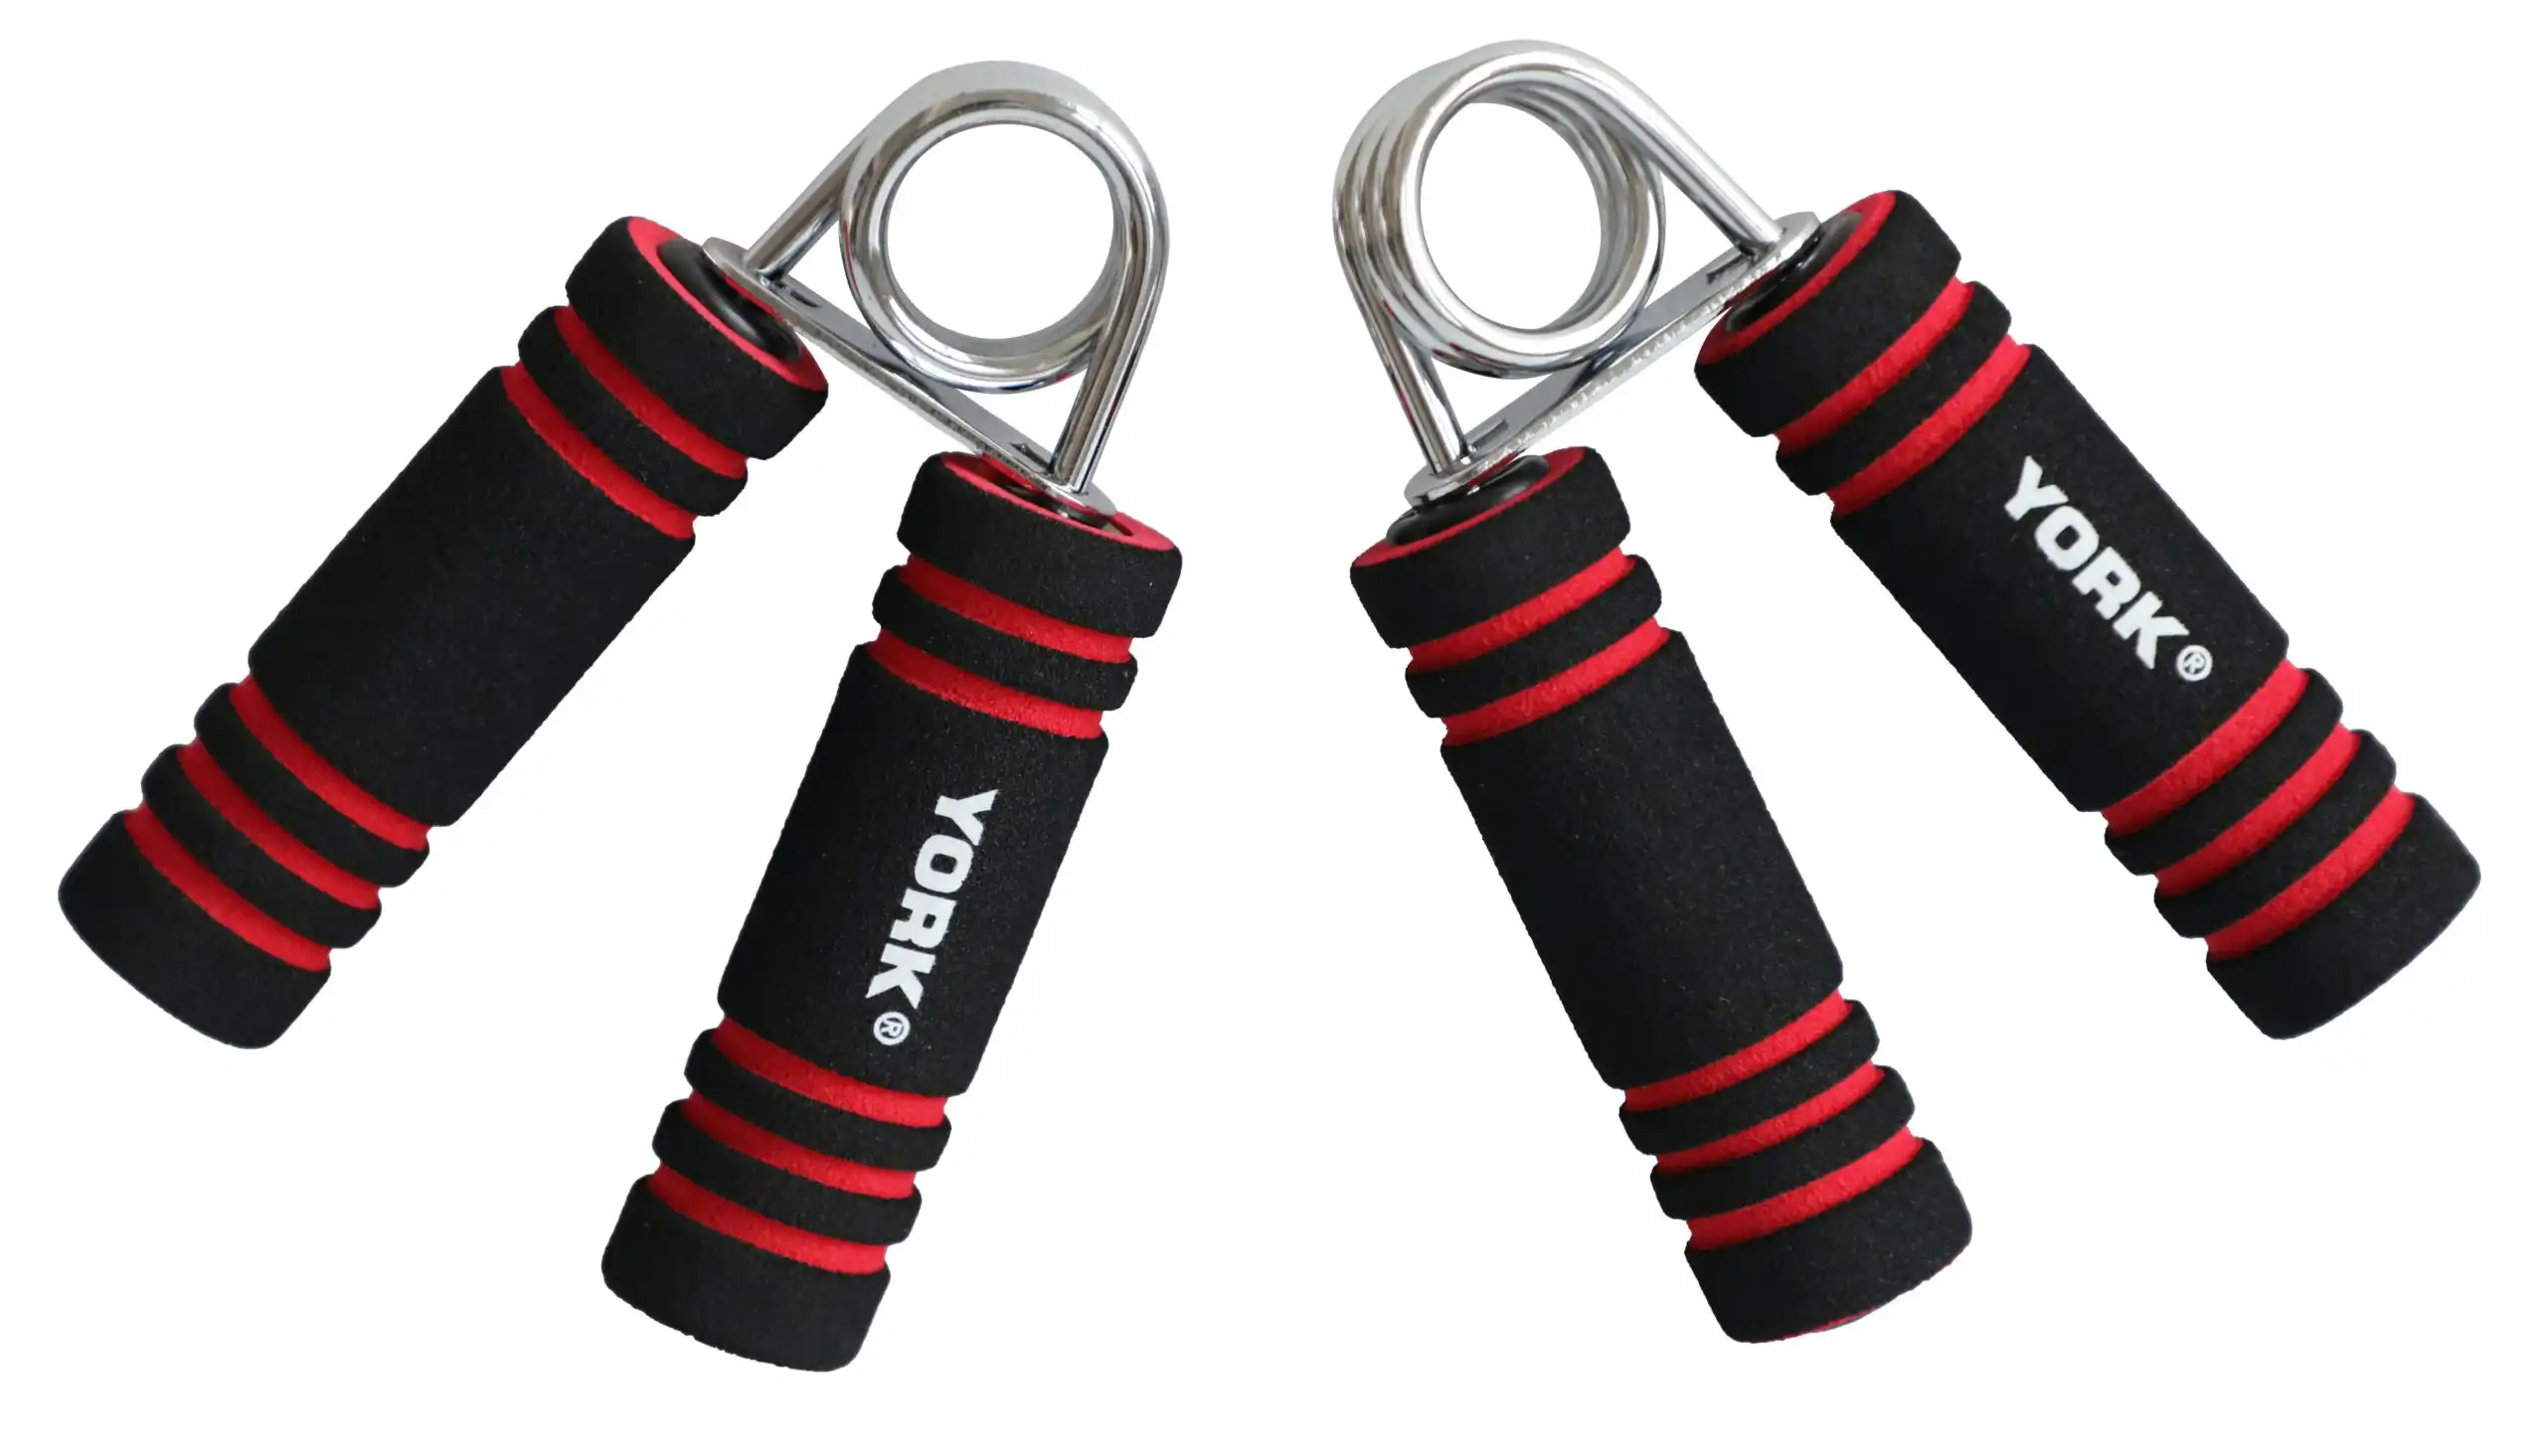 York Fitness Soft handgrips - Extra strong